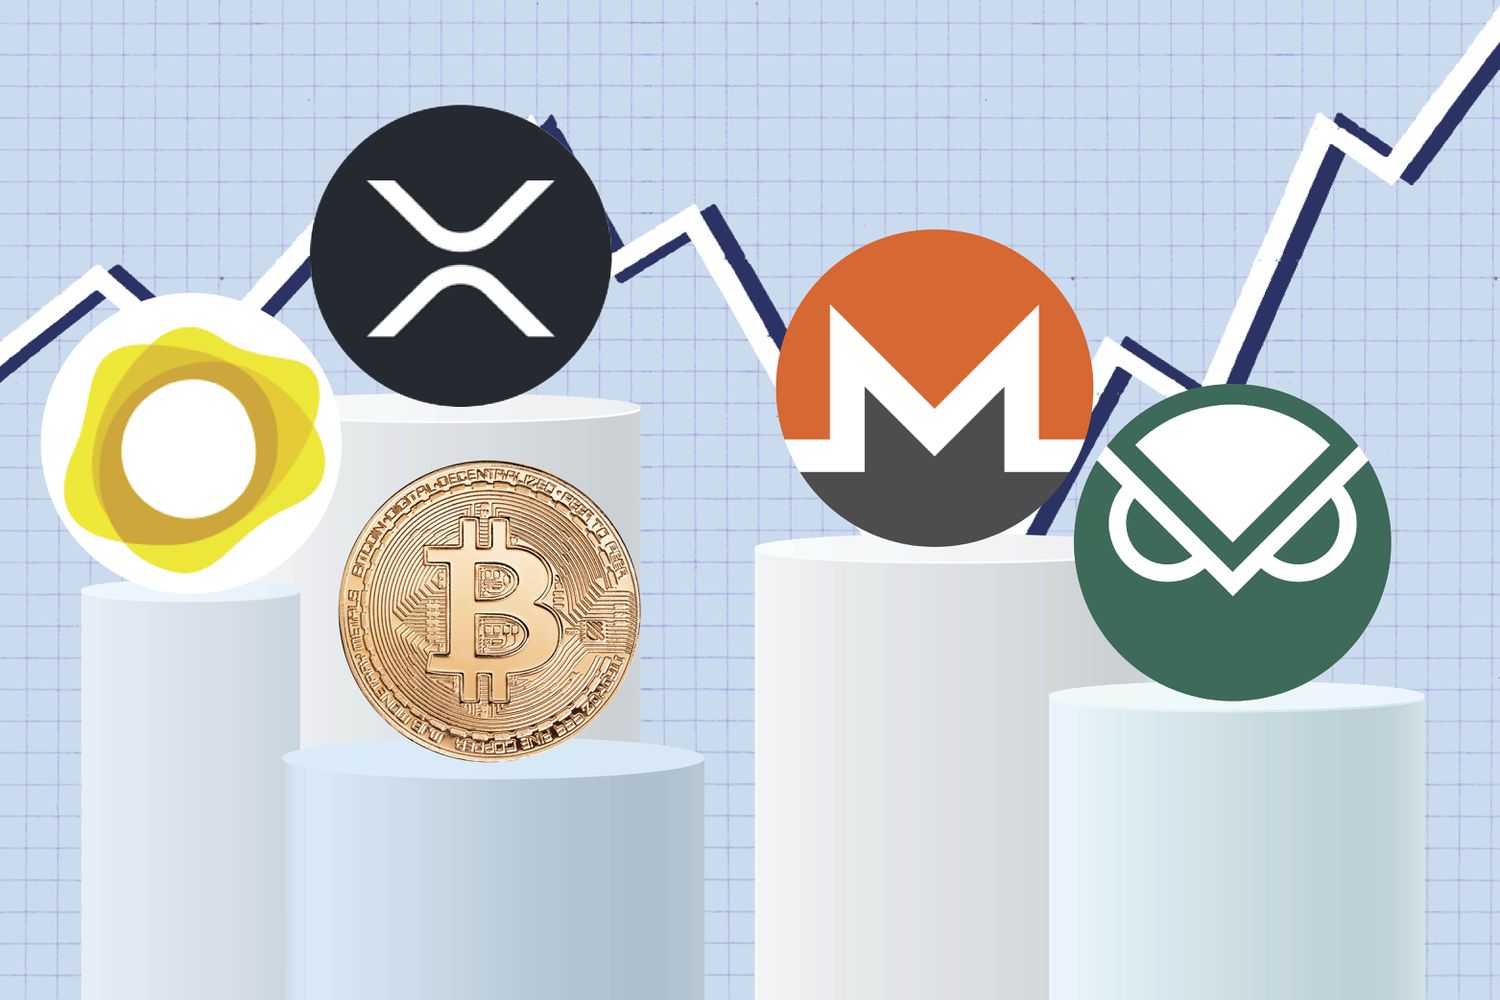 Monero (XMR) vs Ripple (XRP) - What Is The Best Investment?